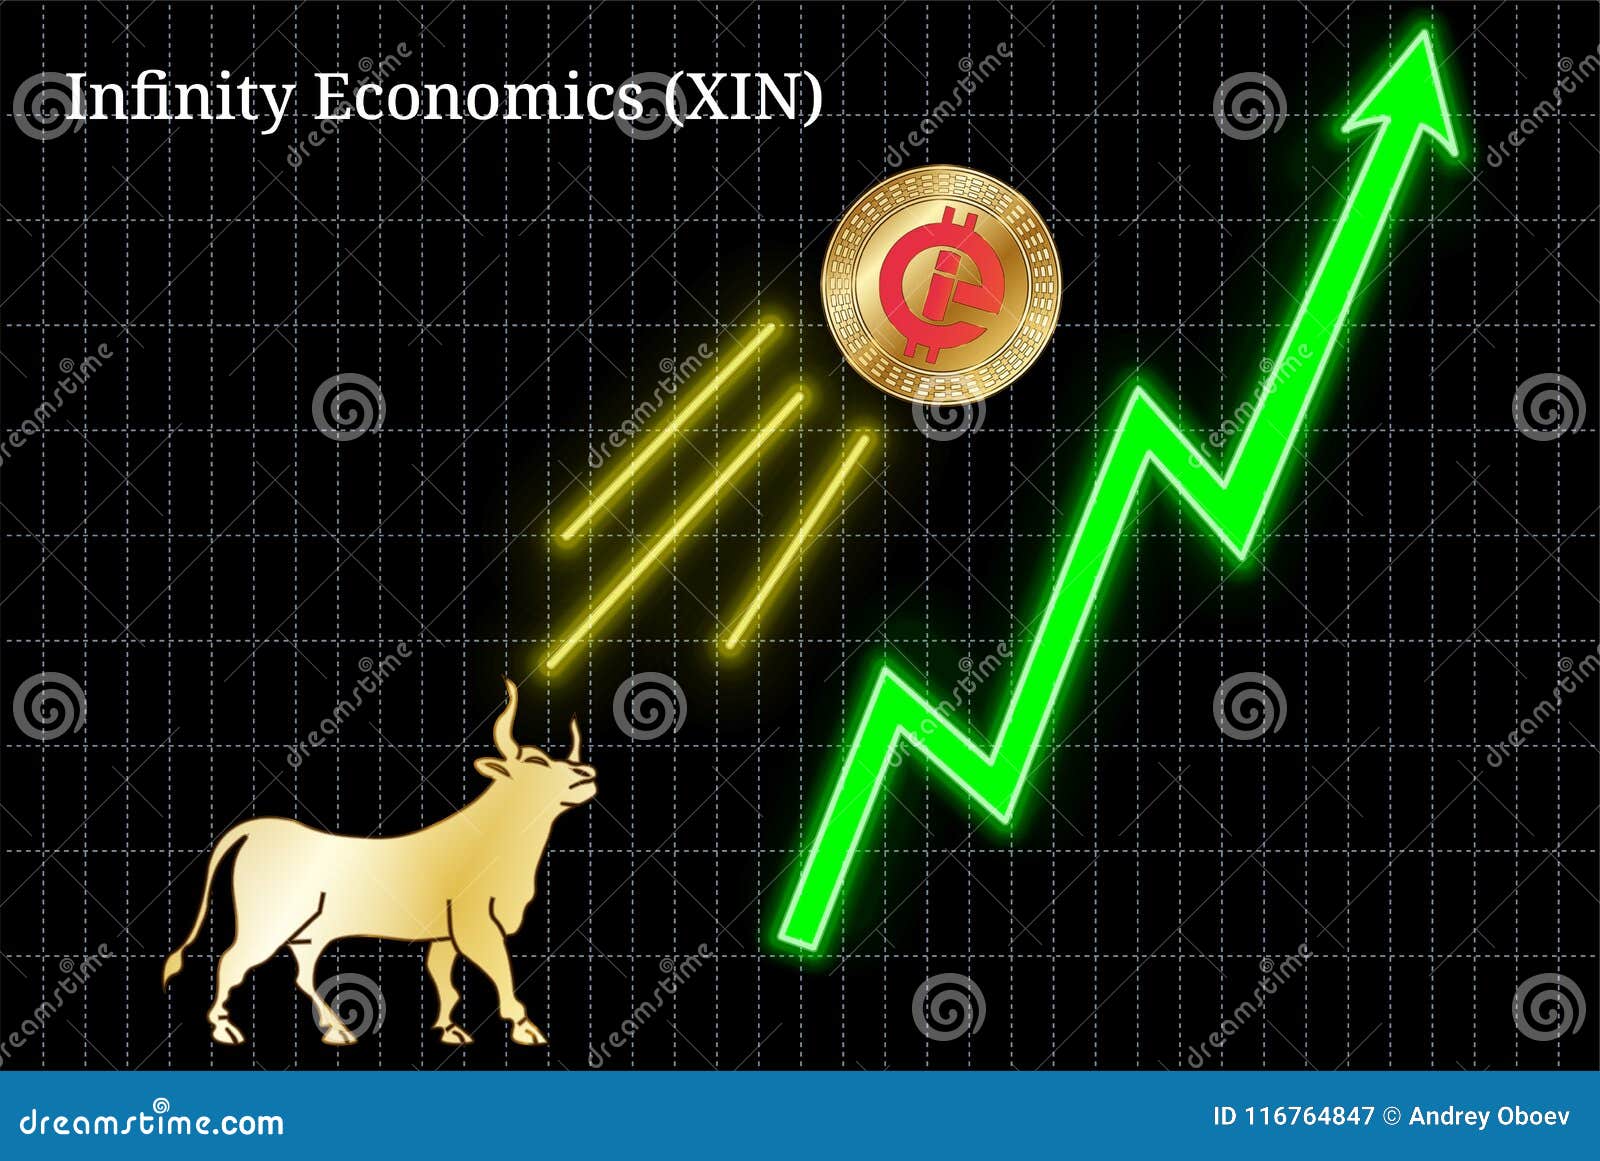 Infinity Economics Price Today - XIN to US dollar Live - Crypto | Coinranking